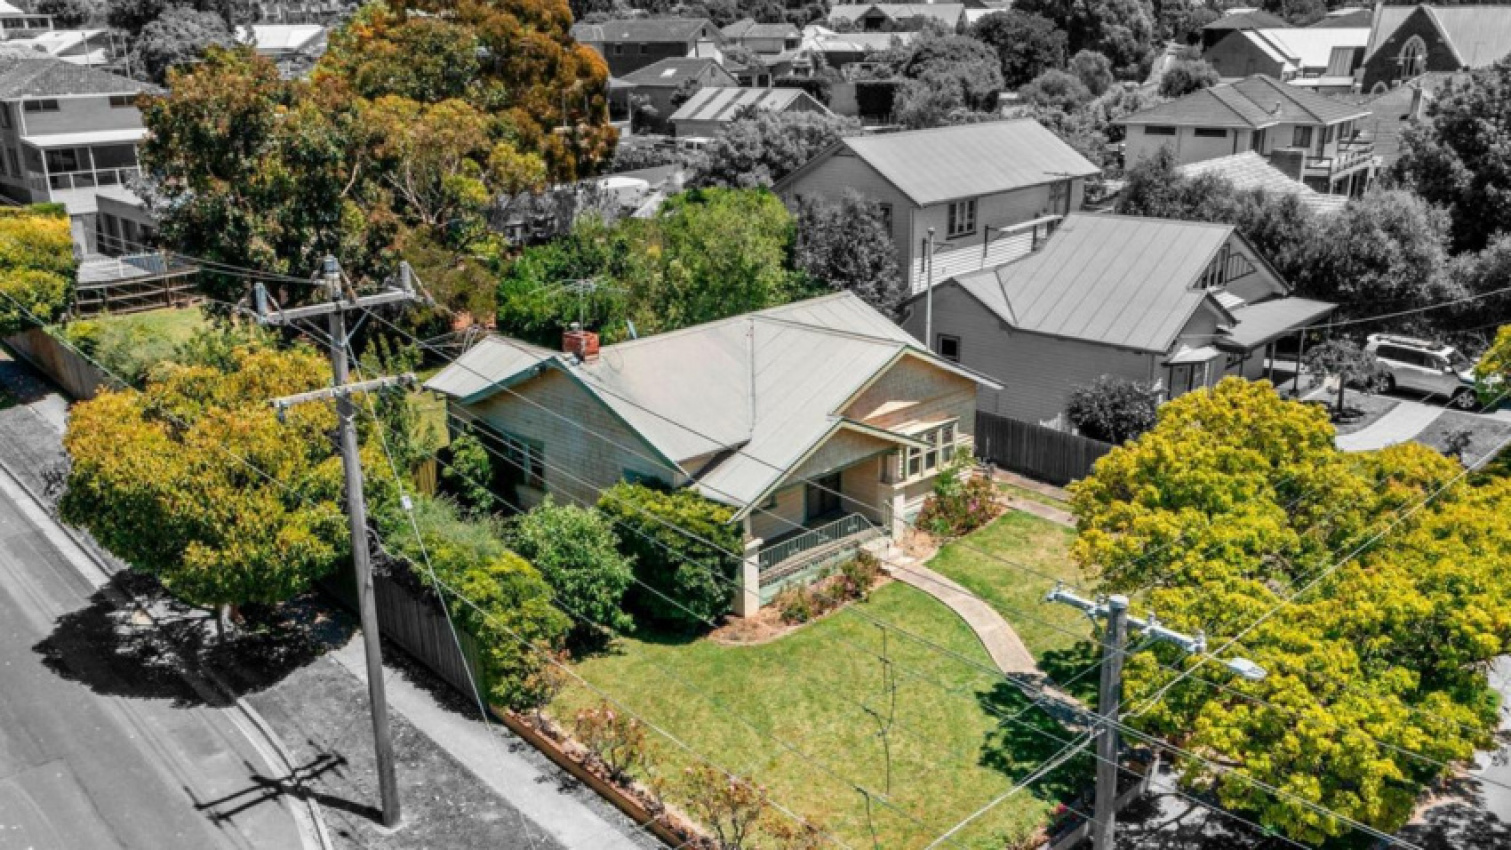 autos, cars, news, finance, real estate, selling, dream inner geelong home site sells $400k above price hopes